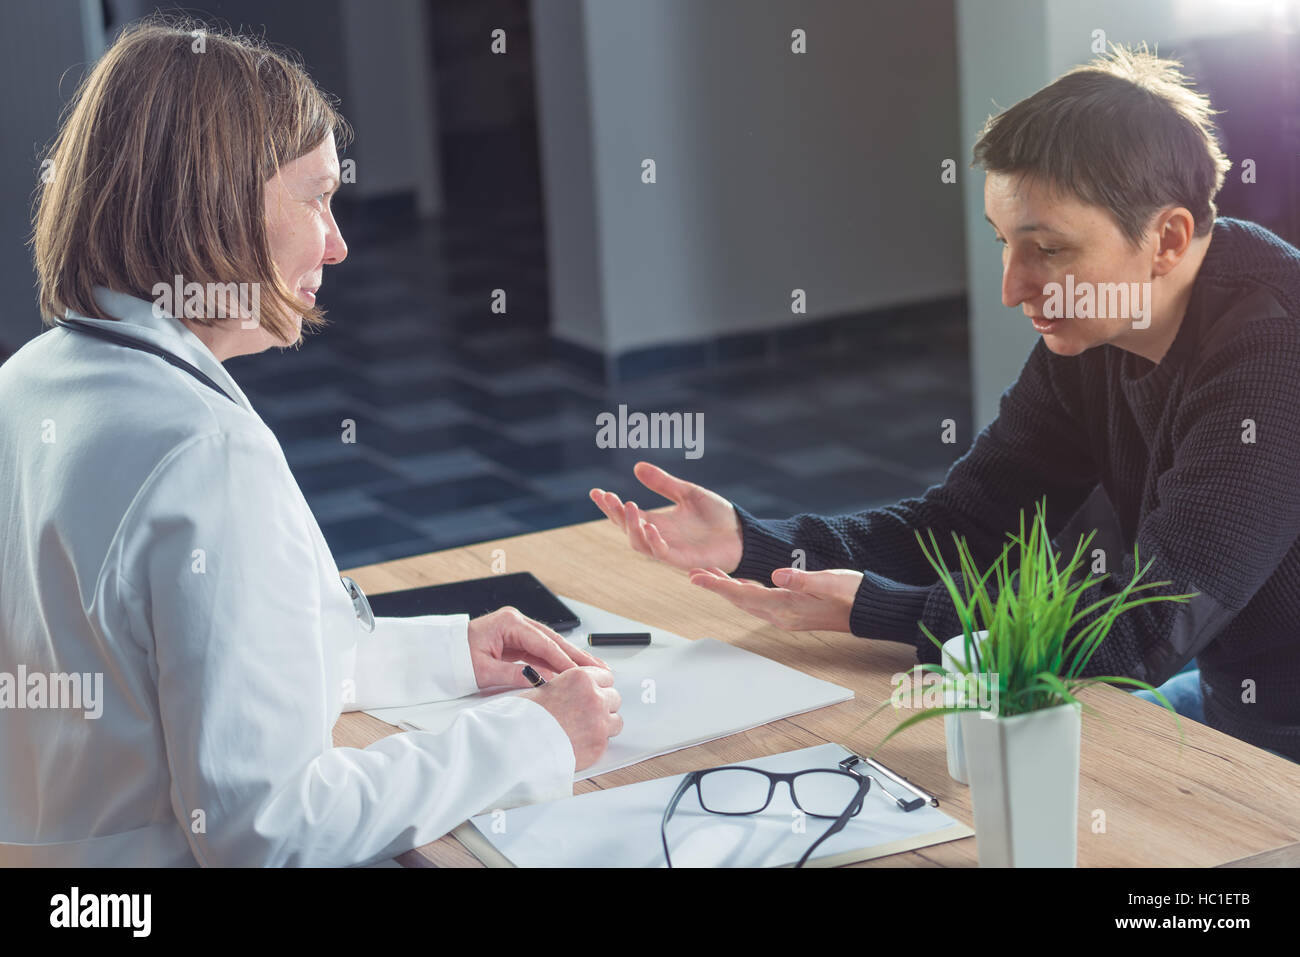 Female doctor and patient consultation during medical exam in hospital examination room Stock Photo